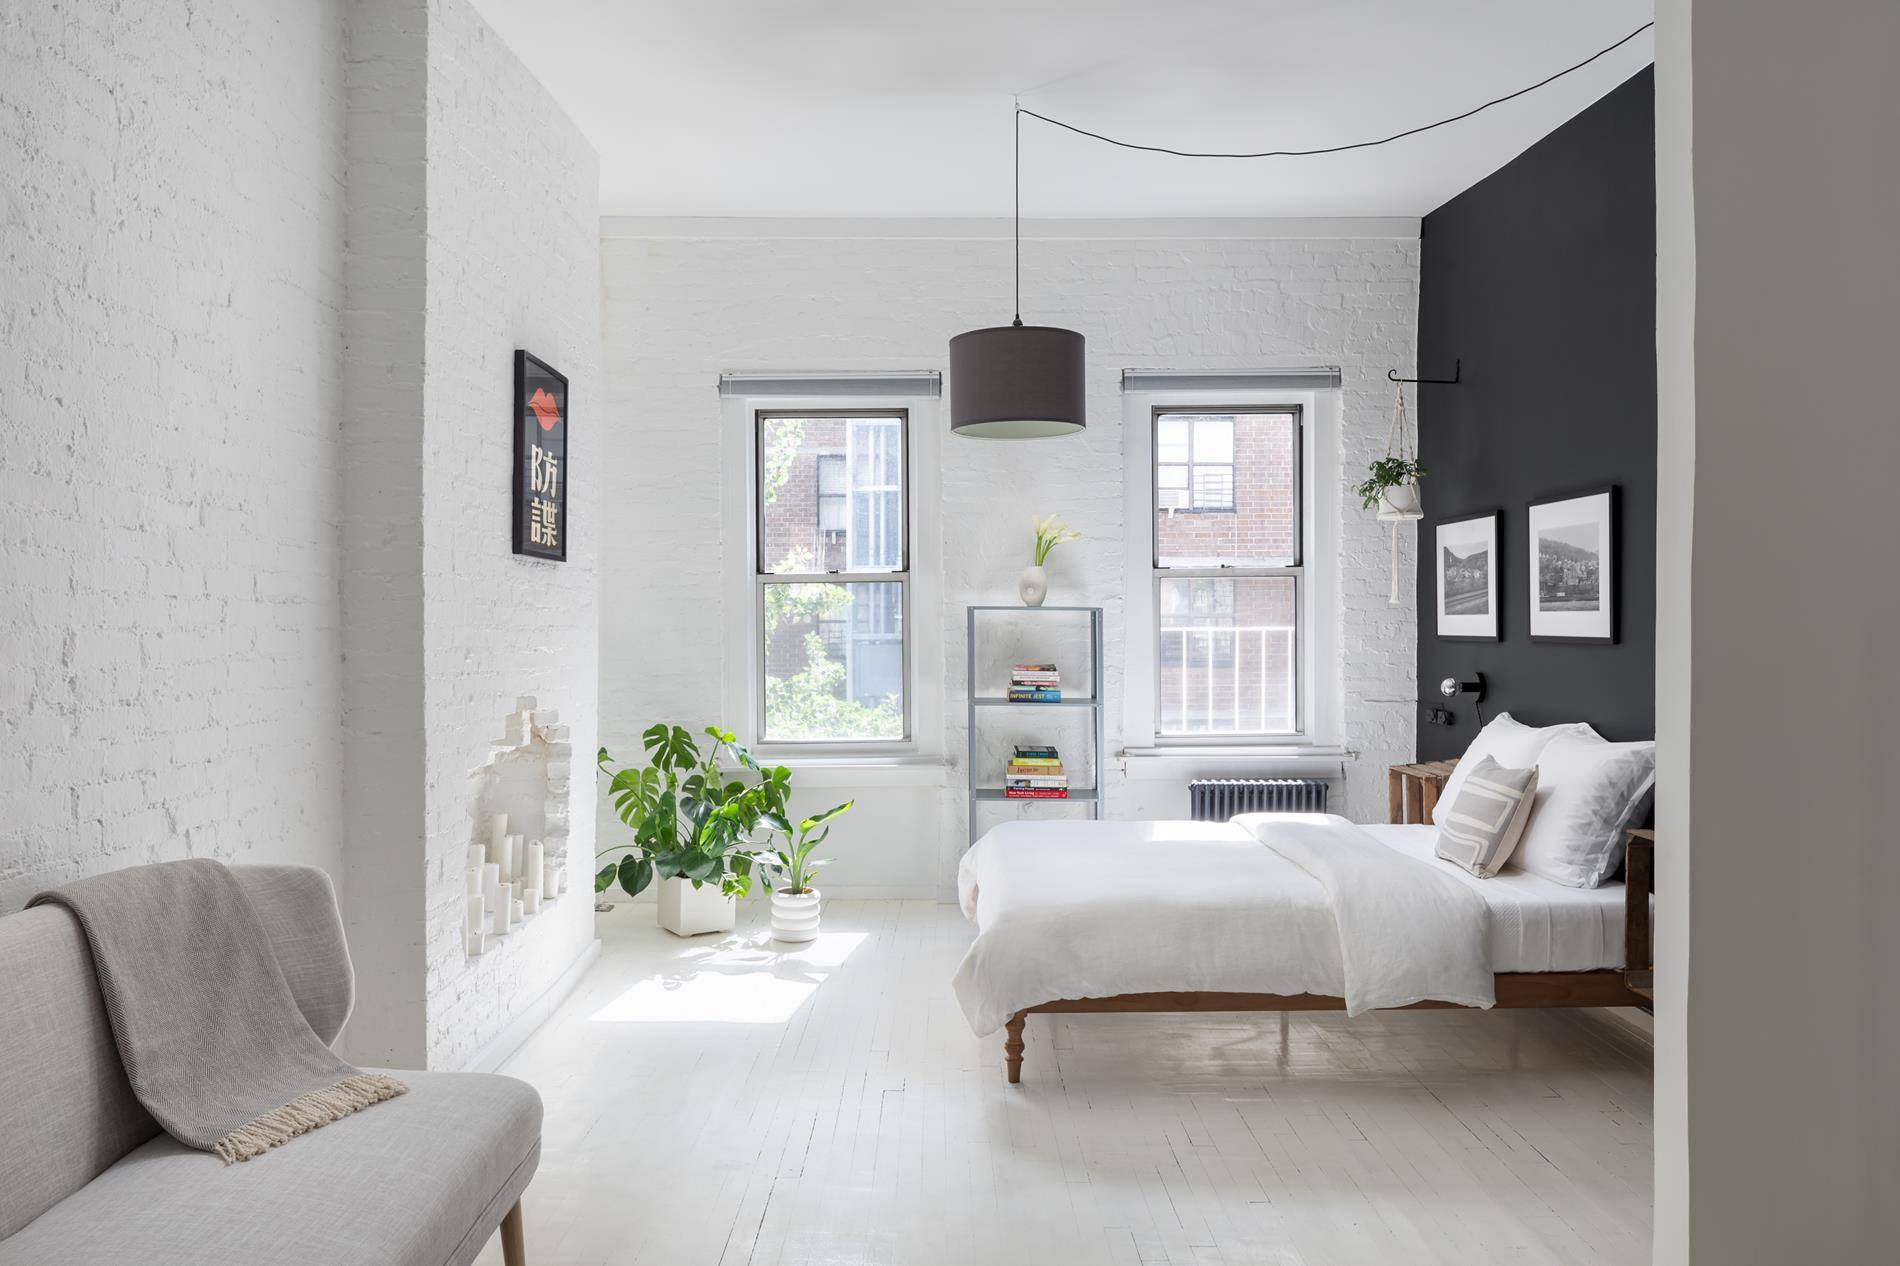 Sun drenched with light from the six windows that wrap this top floor studio one bedroom East Village loft.